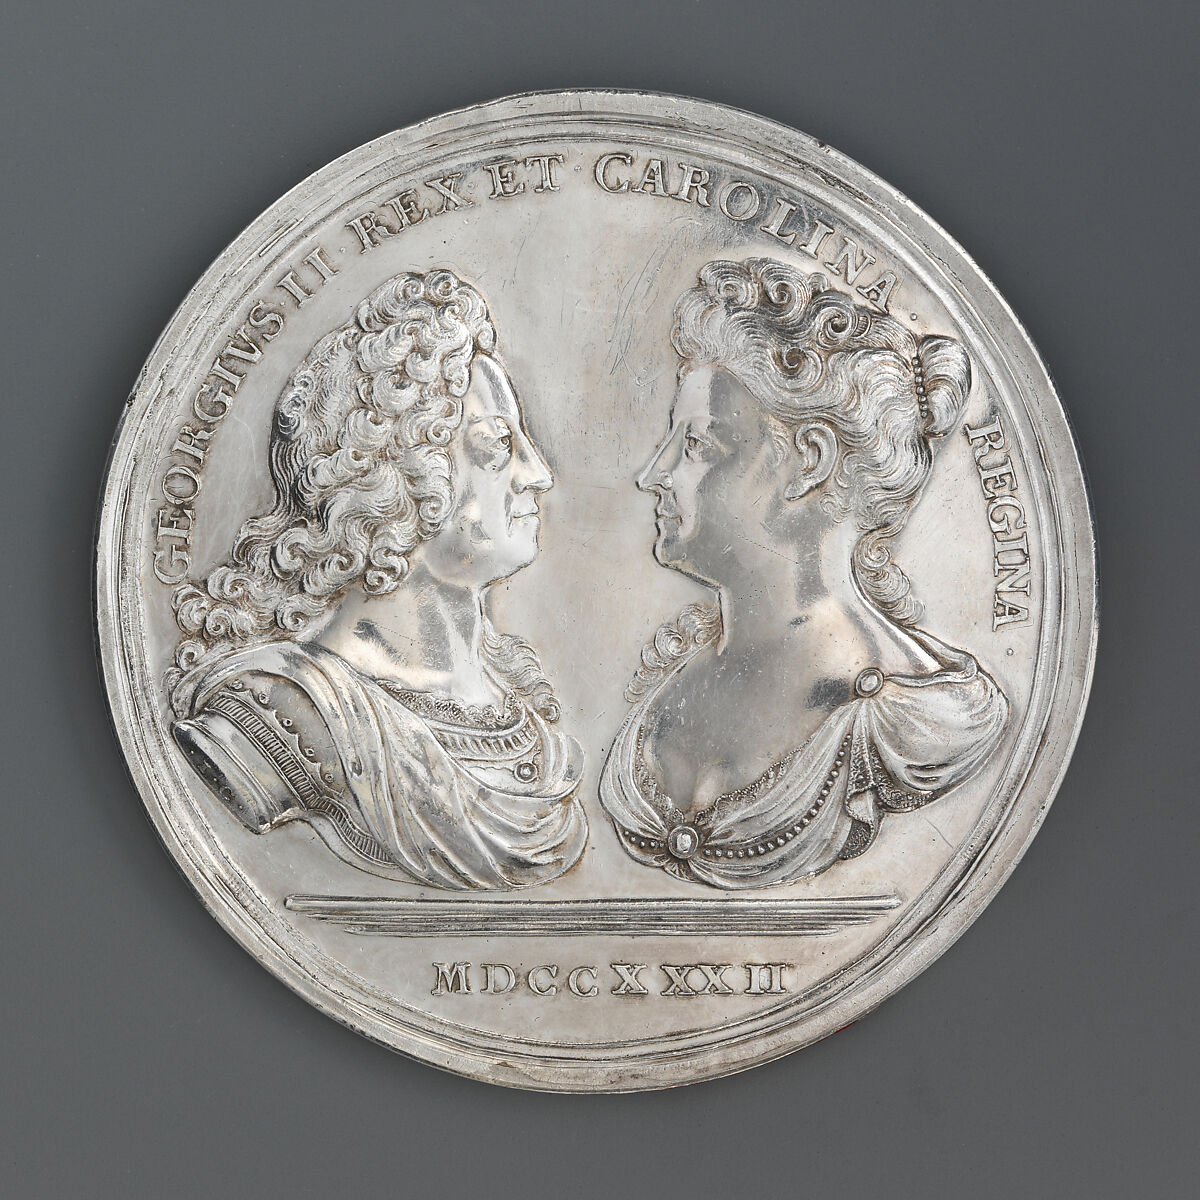 Medal of George II and his Family, Medalist: John Croker (British, 1670–1741), Silver, British 